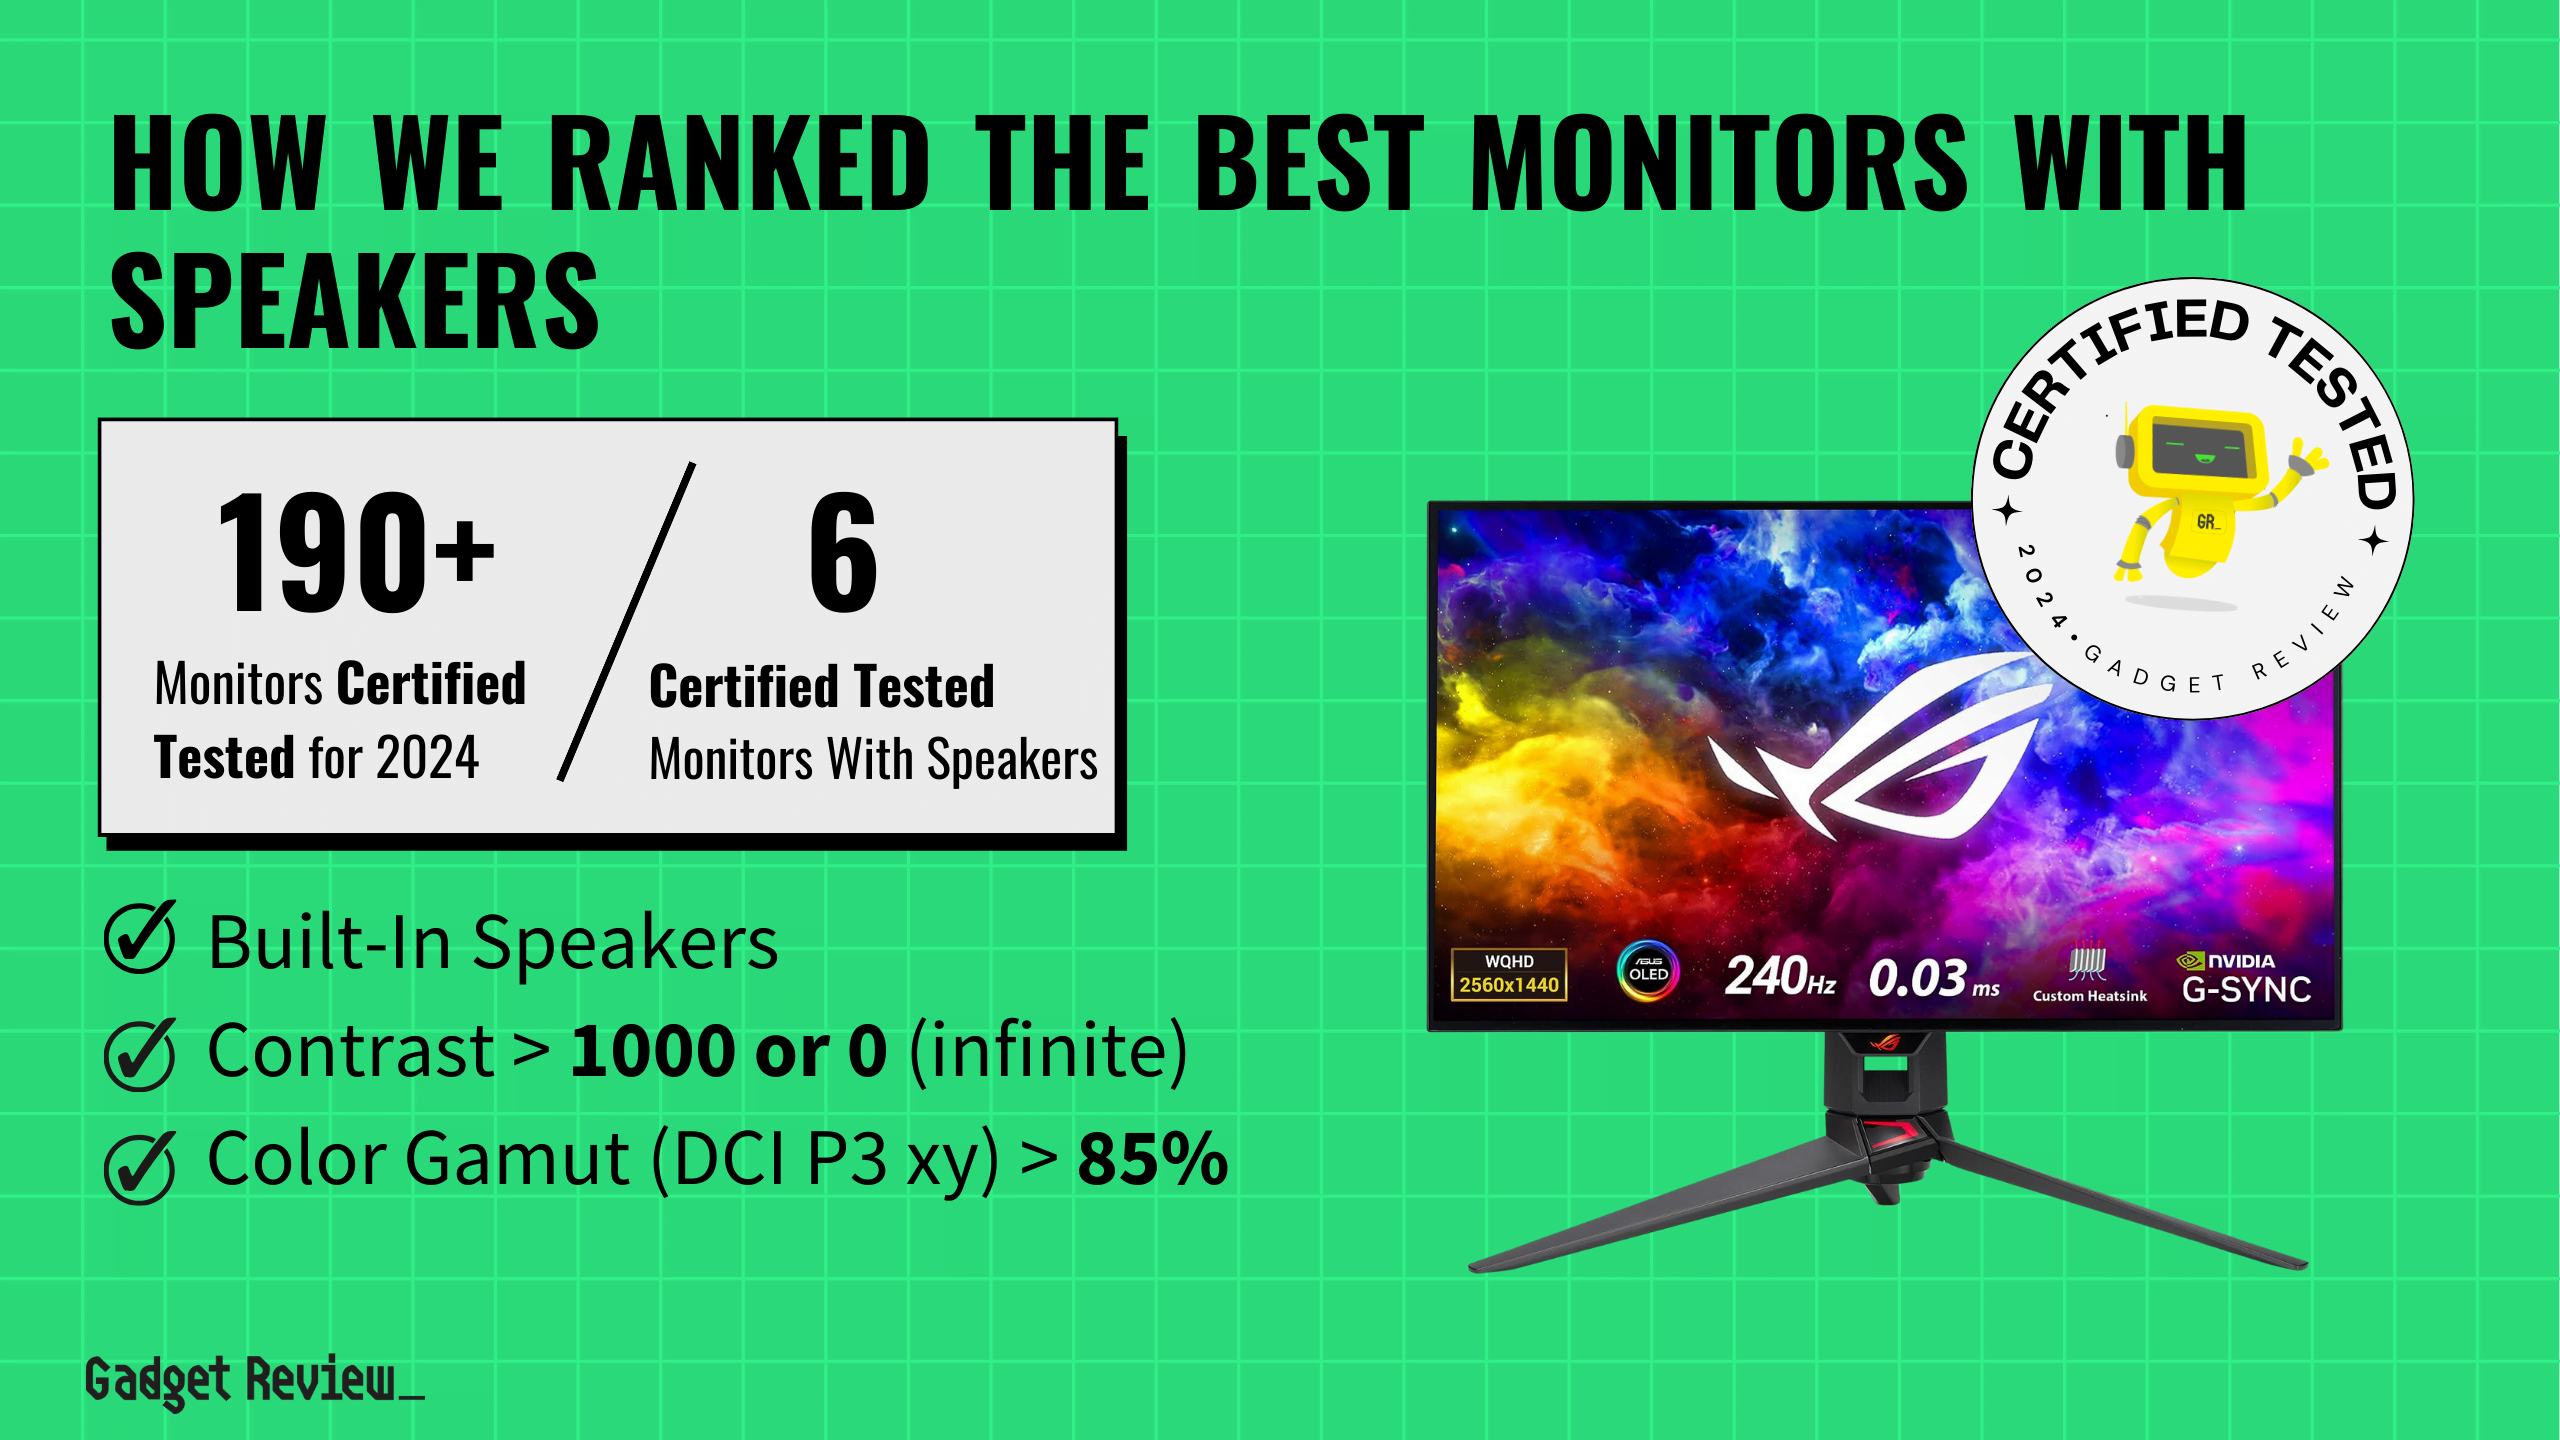 best monitor with speakers guide that shows the top best computer monitor model